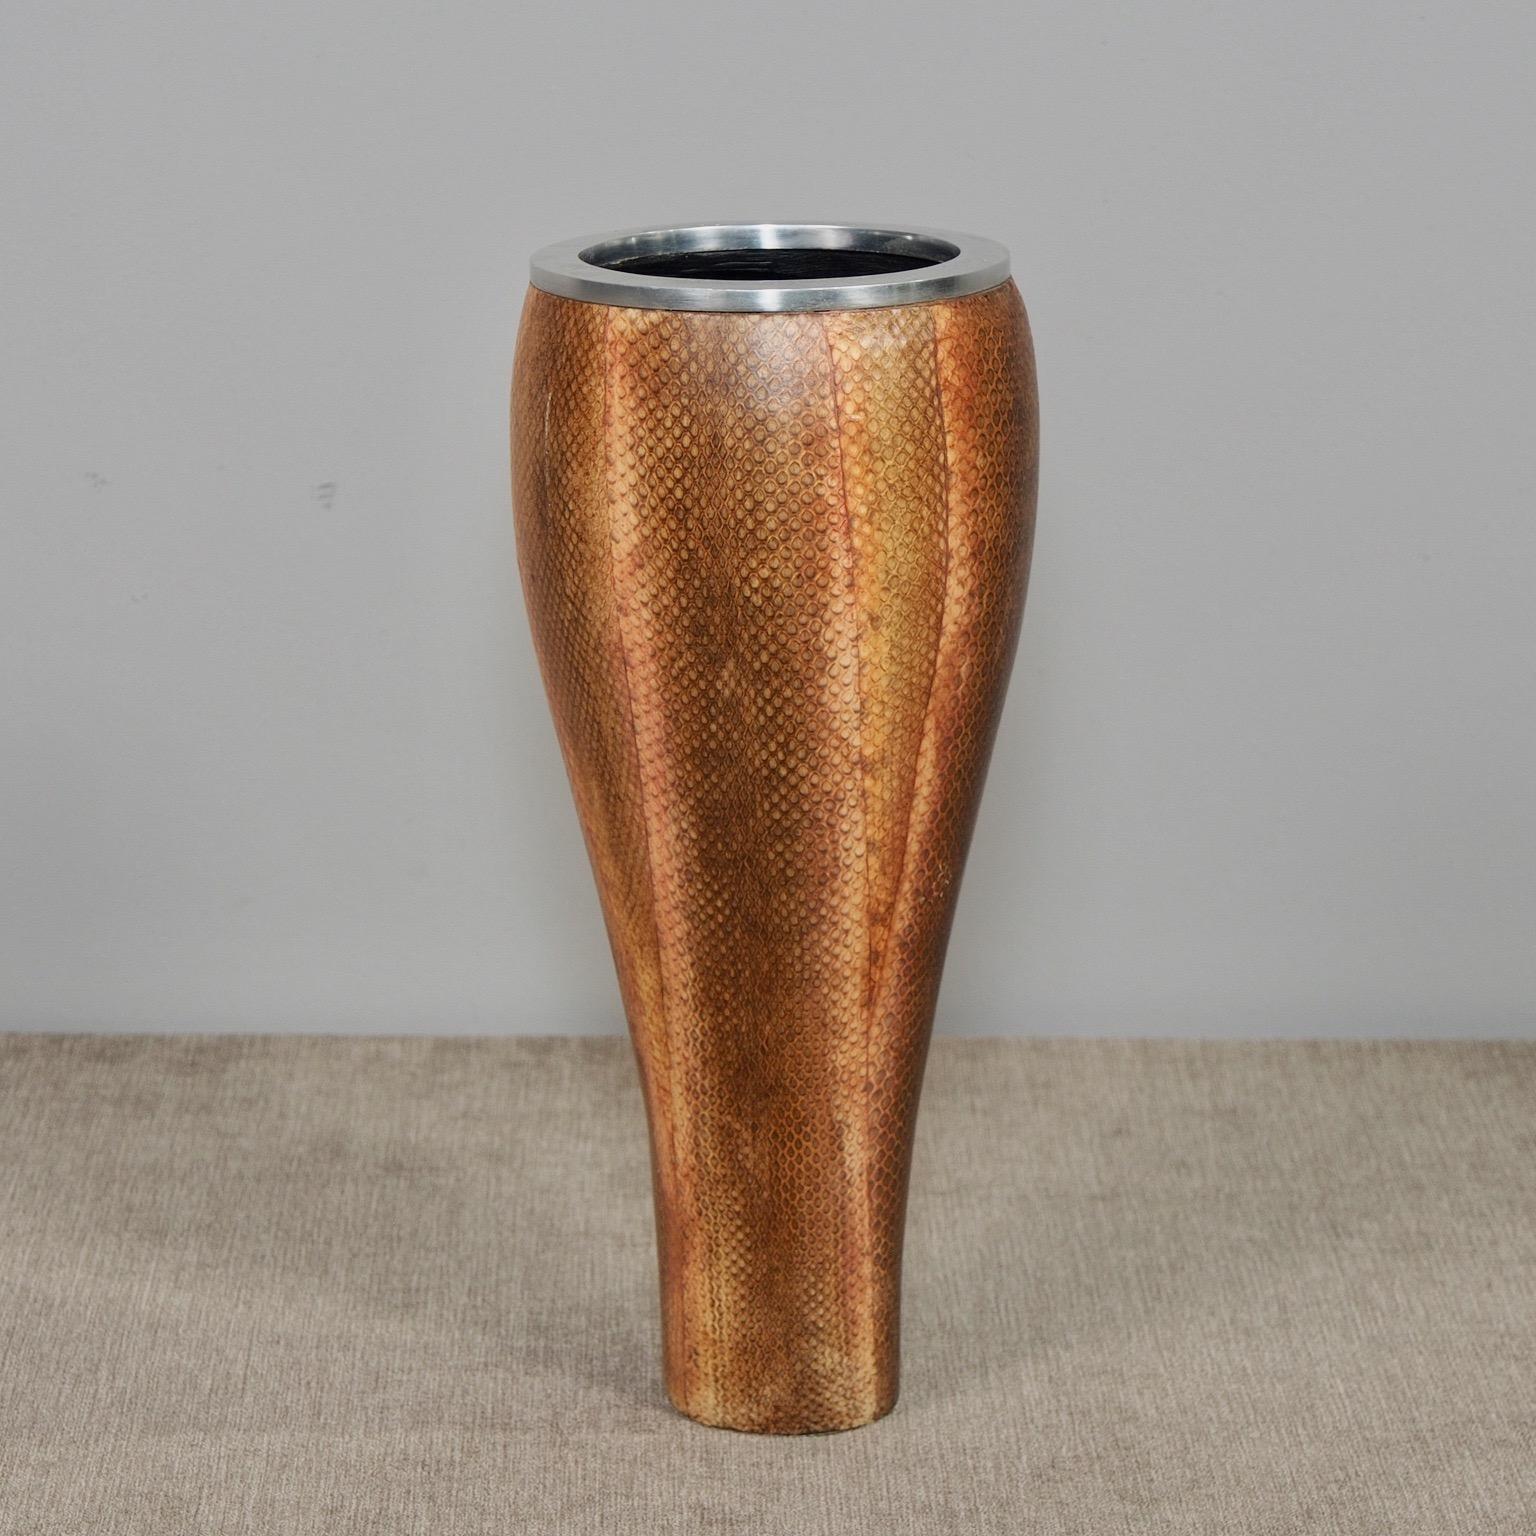 New Italian vase features a silver tone metal base that is narrower on bottom and wider at top. Real snakeskin surface has been hand painted. Unknown maker. Other similar pieces in various forms and colors also available at time of this posting.